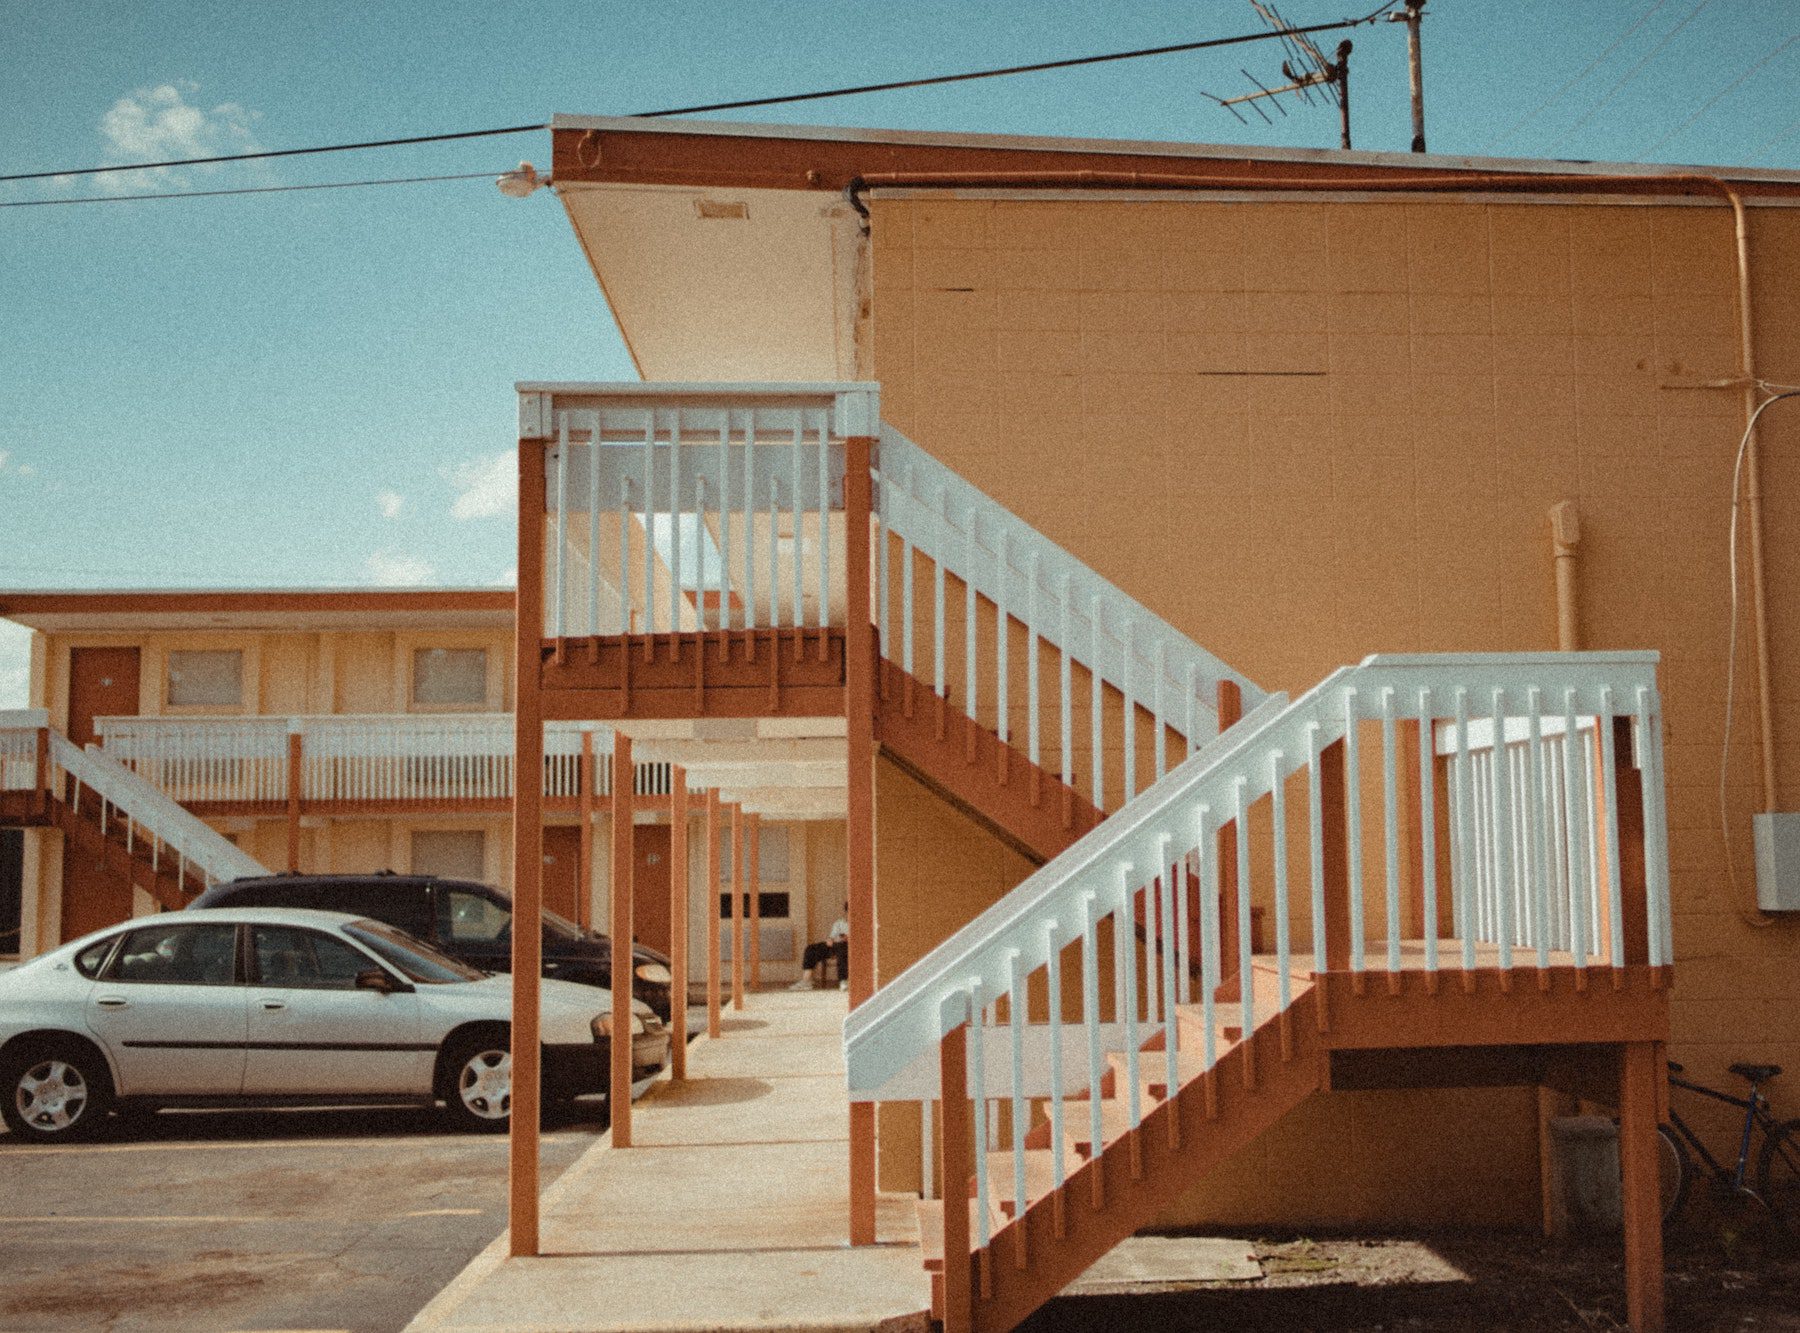 The outside of a two-story motel with light orange paint and white stair railings.